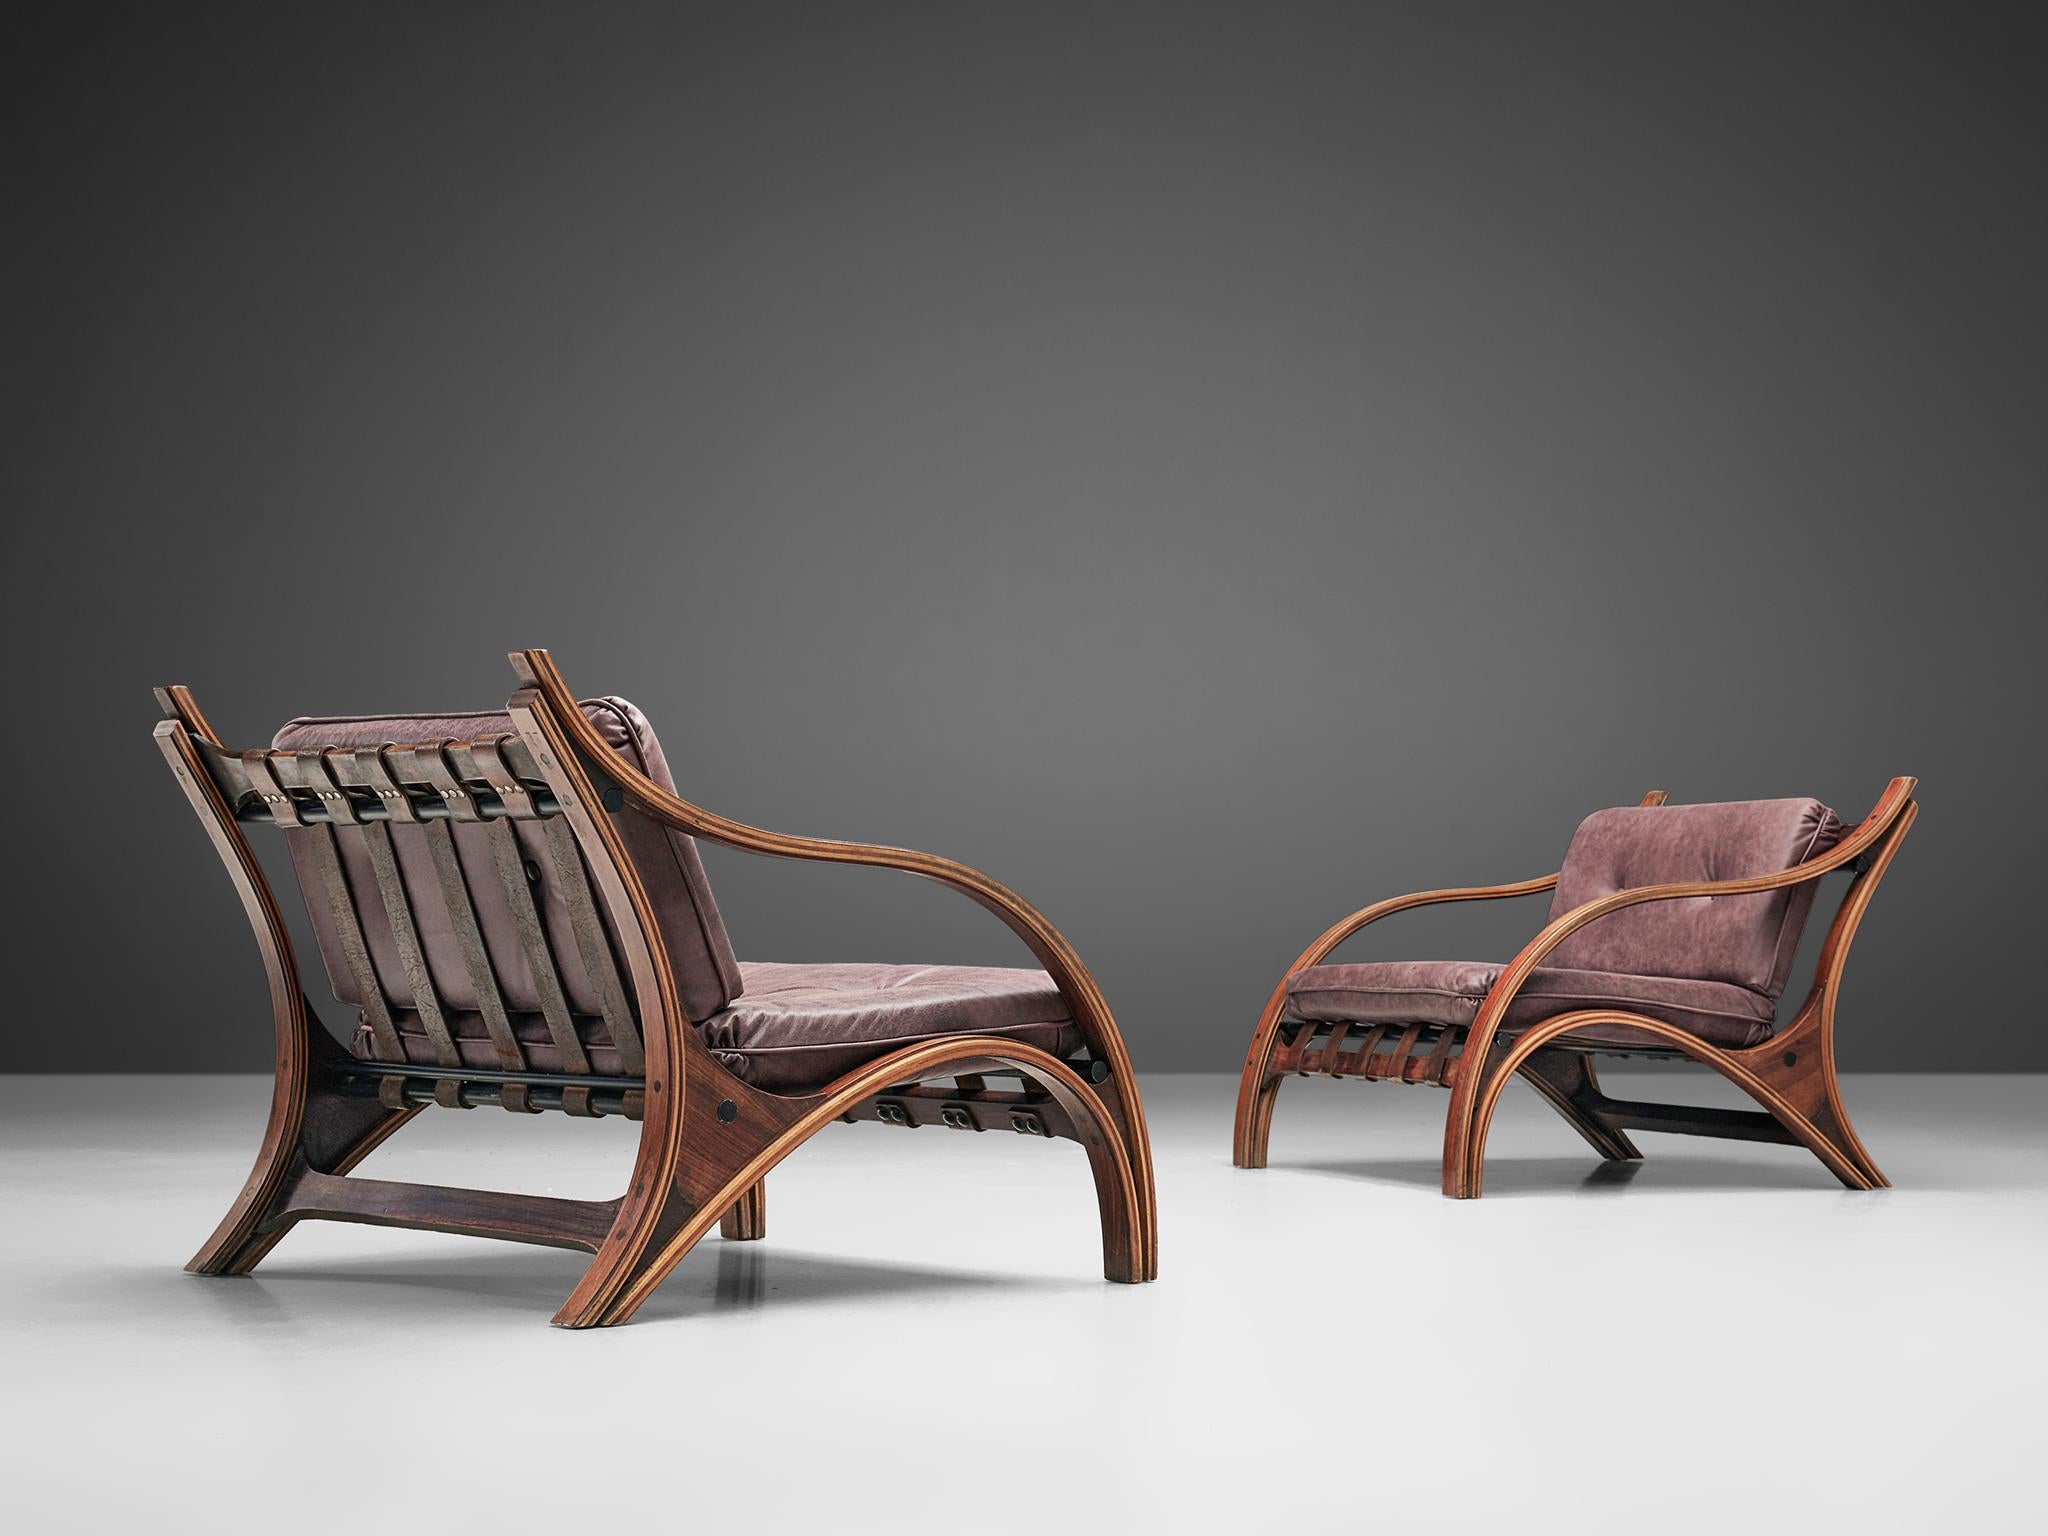 Giampiero Vitelli, pair of lounge chairs to be reupholstered, rosewood and fabric, Italy, 1960s.

Set of Italian armchairs that feature curves and gracious forms. The most interesting feature is the rosewood frame with its fluid lines. Running from